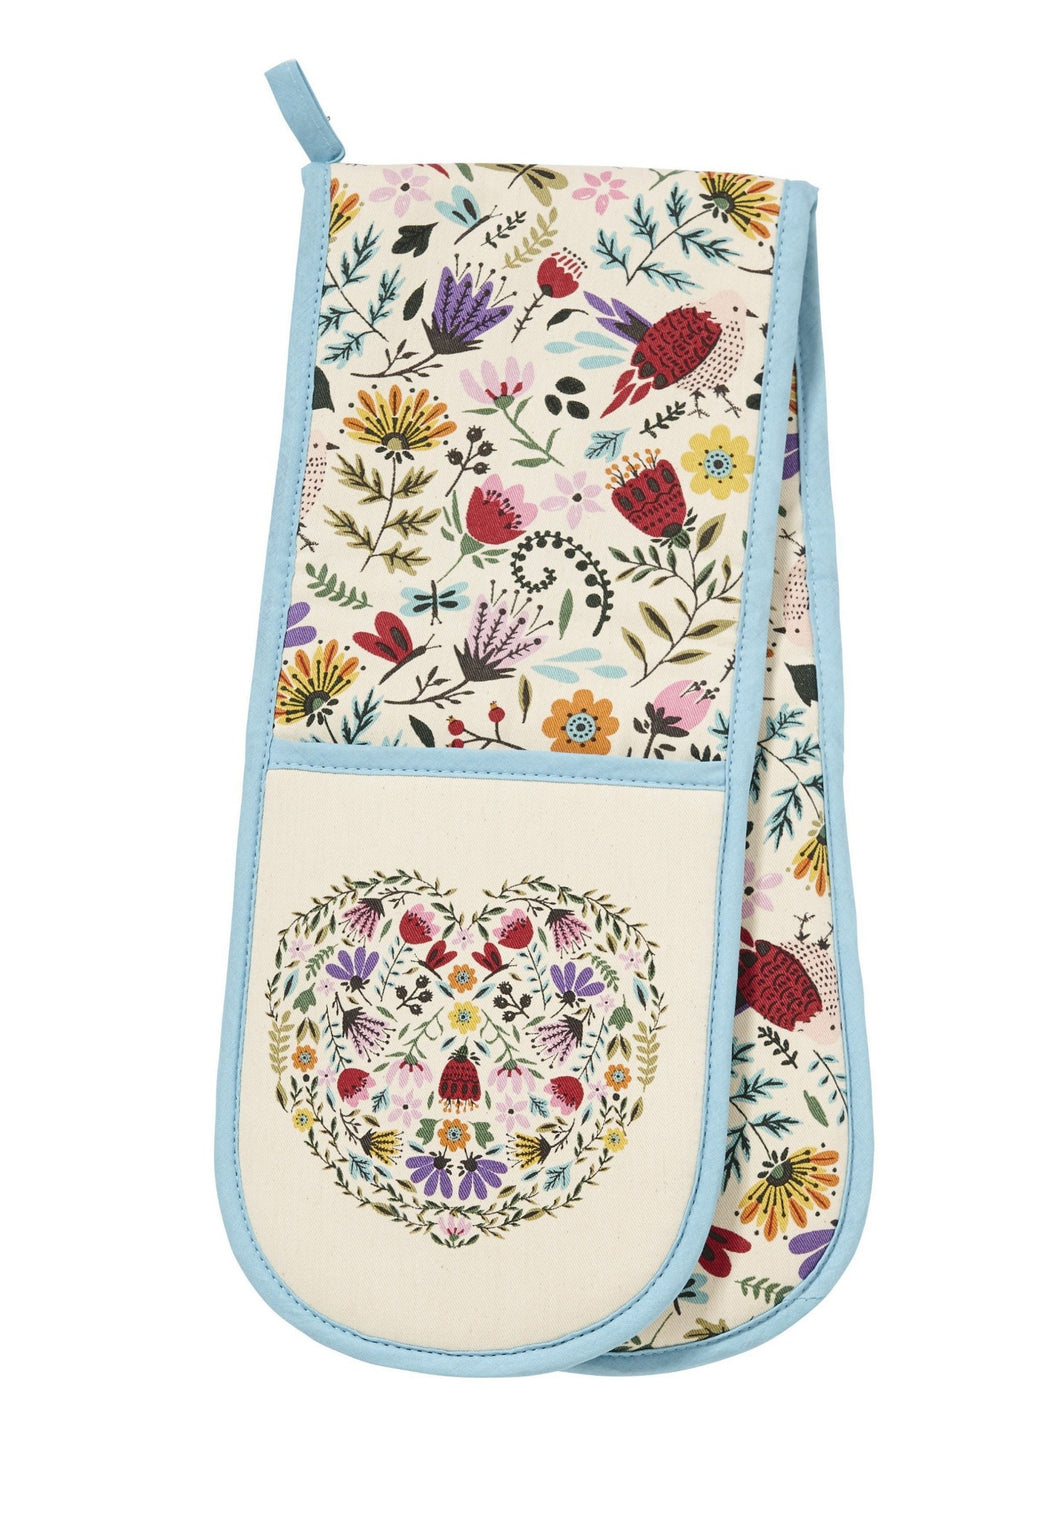 Ulster Weavers Melody Double Oven Glove